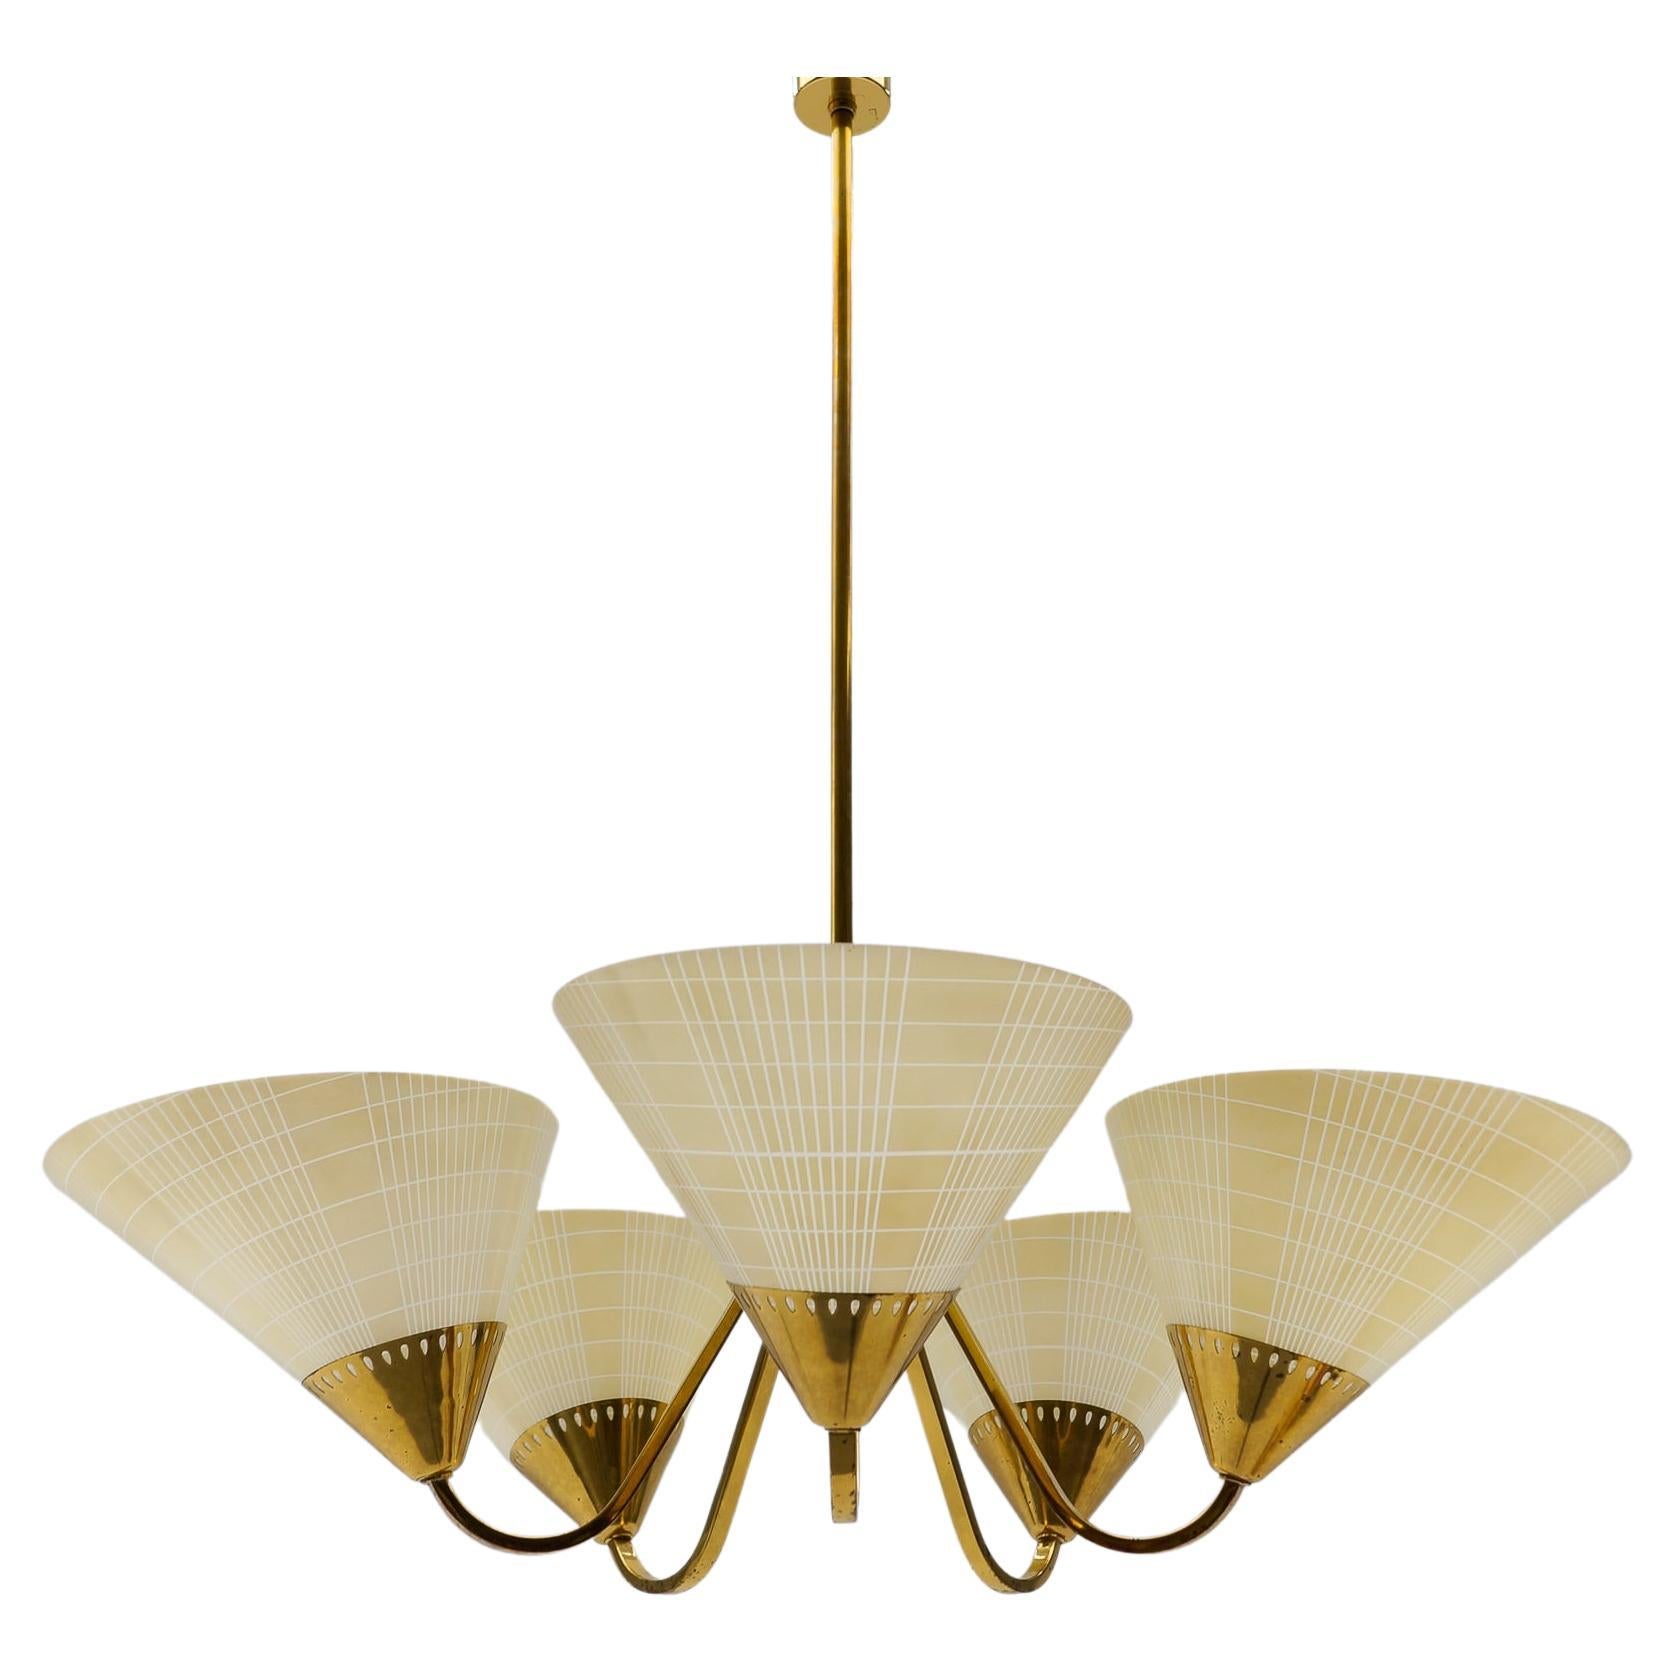 Awesome Mid-Century 5-Light Glass & Brass Ceiling Lamp, 1950s